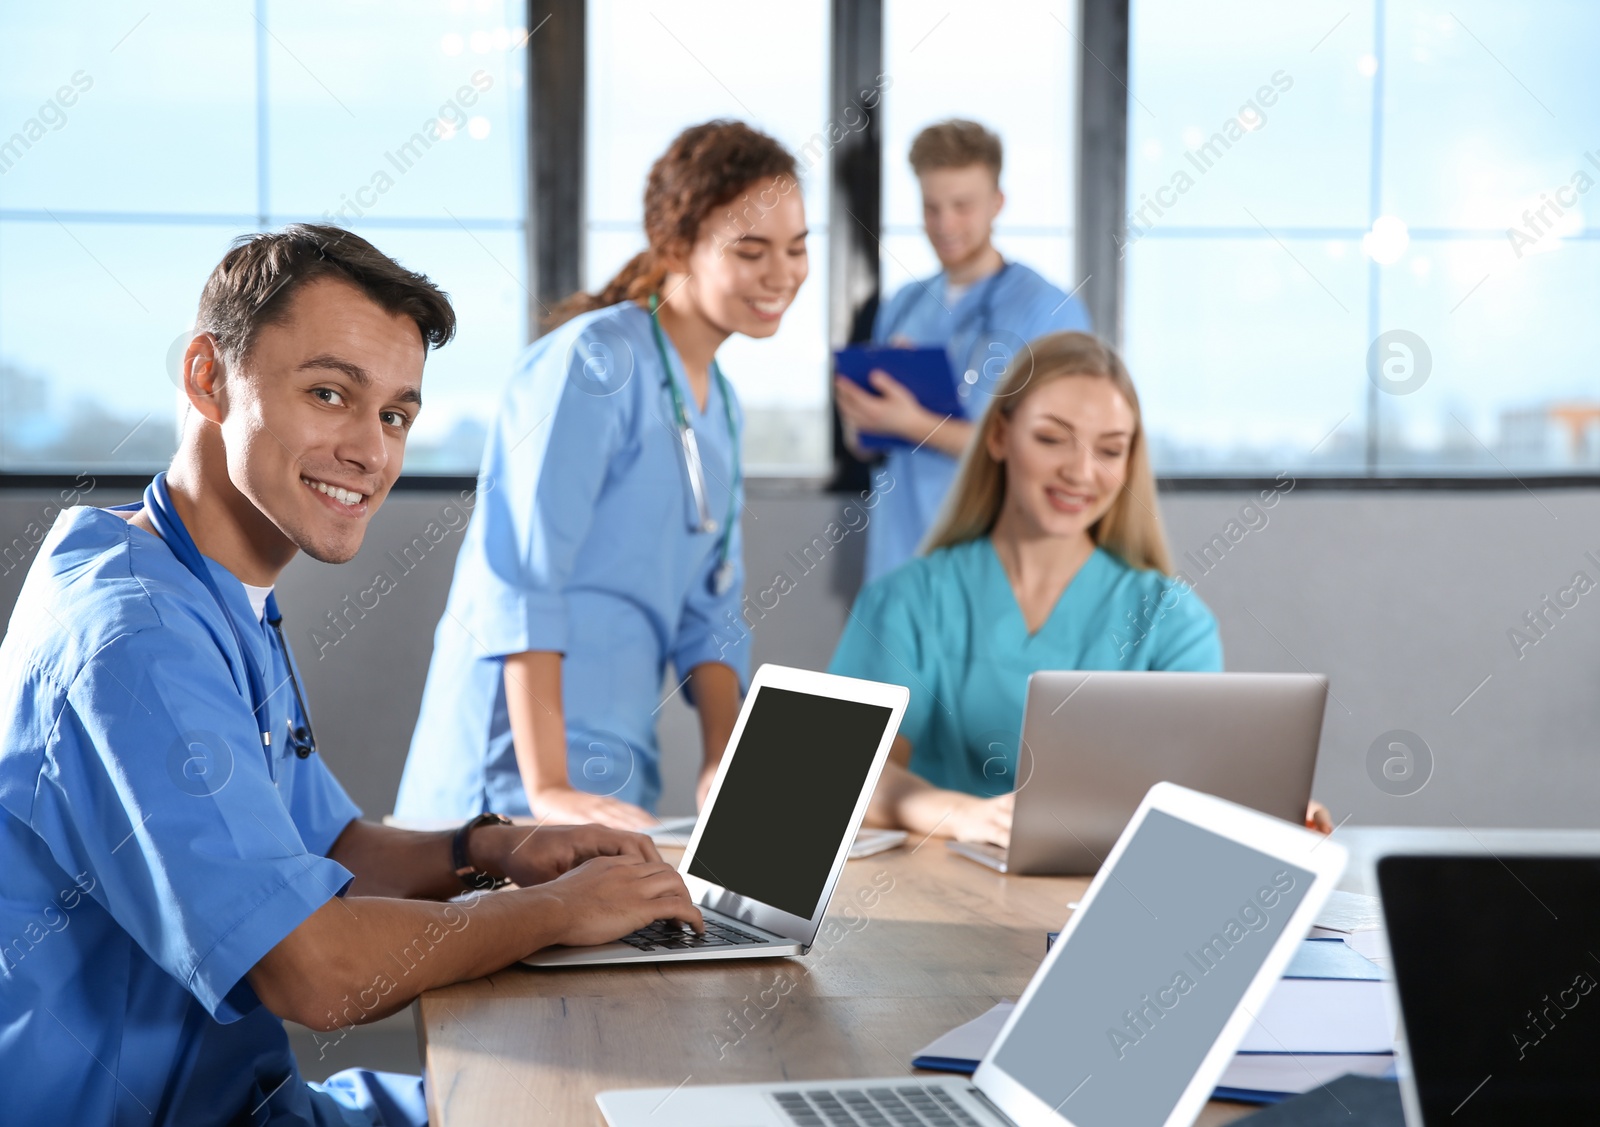 Photo of Medical student with his classmates in college